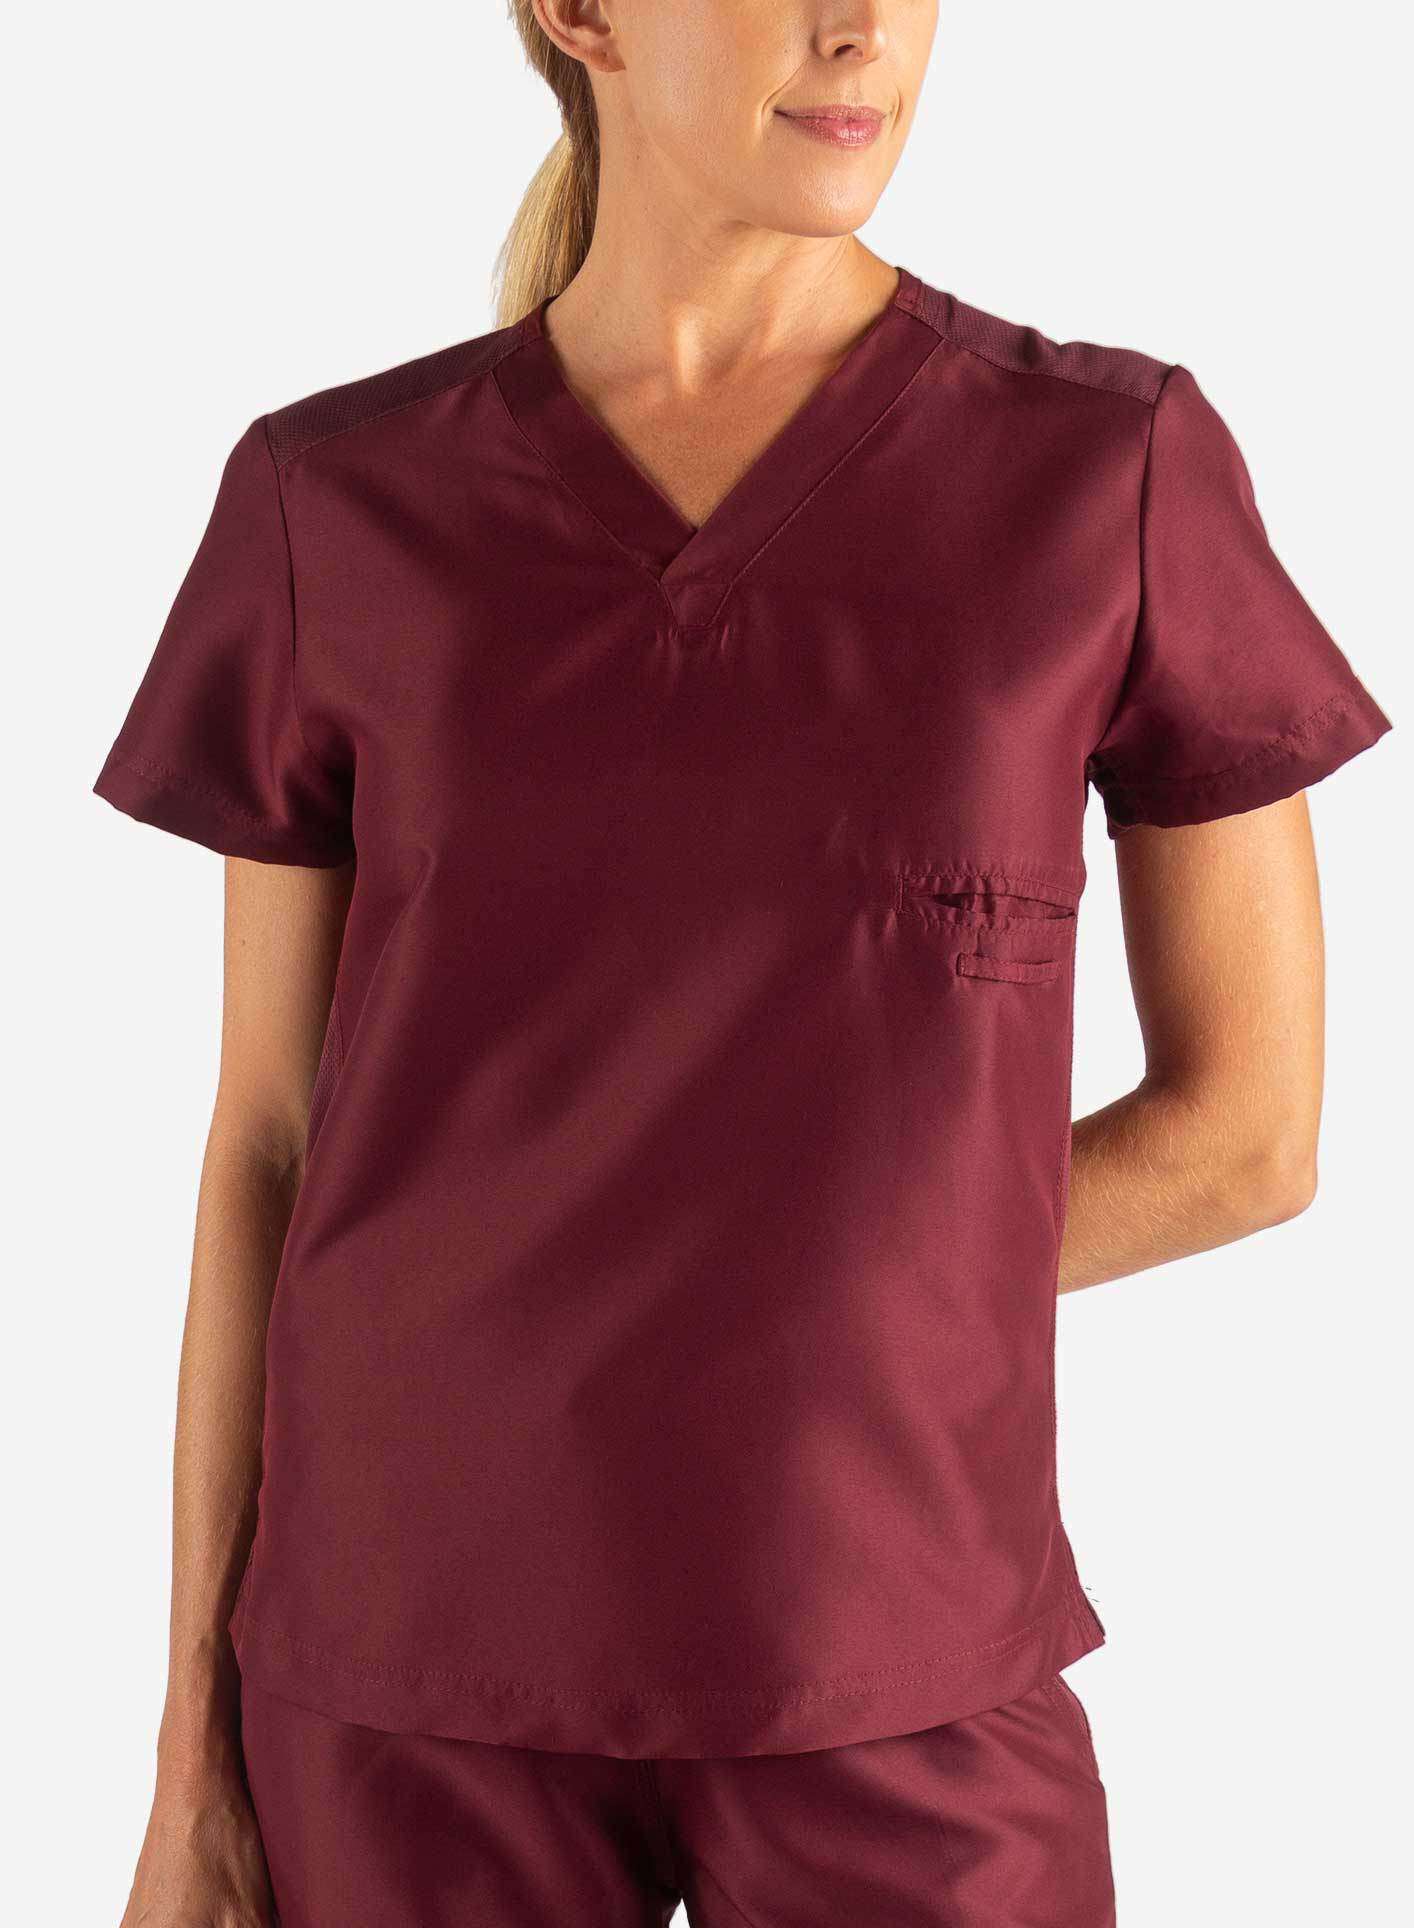 Women's Fitted Scrub Top in Bold burgundy